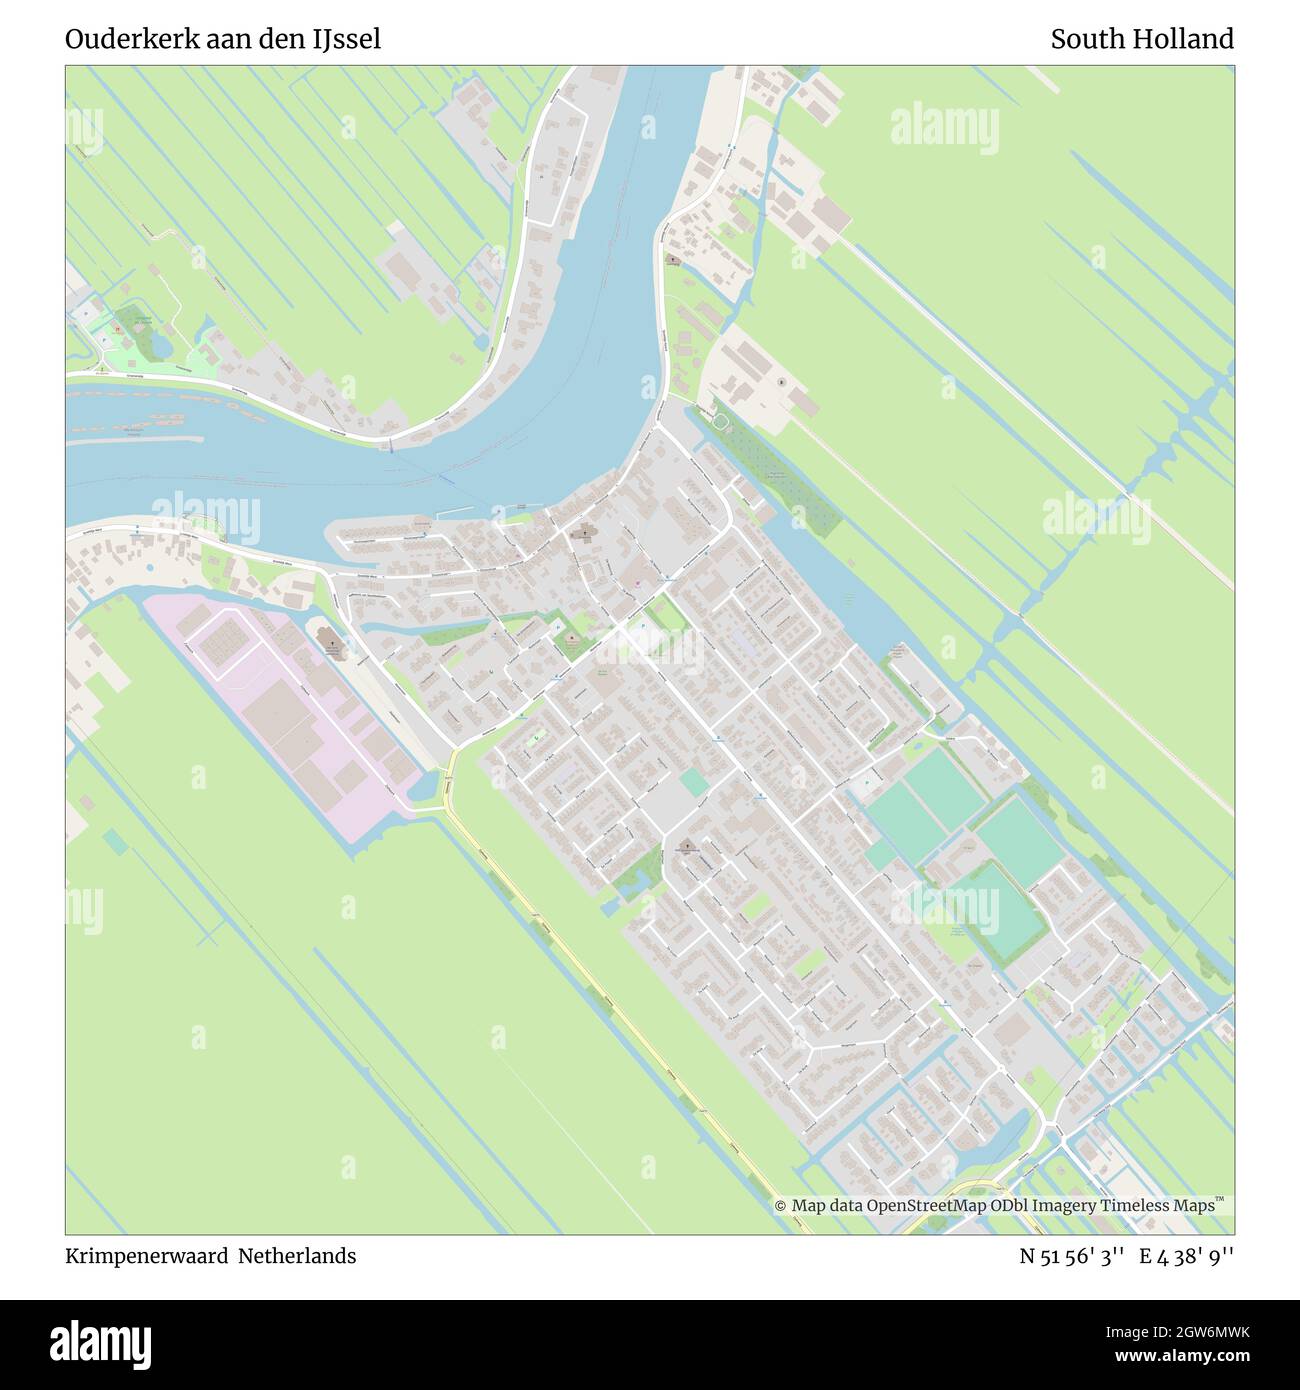 Ouderkerk aan den IJssel, Krimpenerwaard, Netherlands, South Holland, N 51 56' 3'', E 4 38' 9'', map, Timeless Map published in 2021. Travelers, explorers and adventurers like Florence Nightingale, David Livingstone, Ernest Shackleton, Lewis and Clark and Sherlock Holmes relied on maps to plan travels to the world's most remote corners, Timeless Maps is mapping most locations on the globe, showing the achievement of great dreams Stock Photo